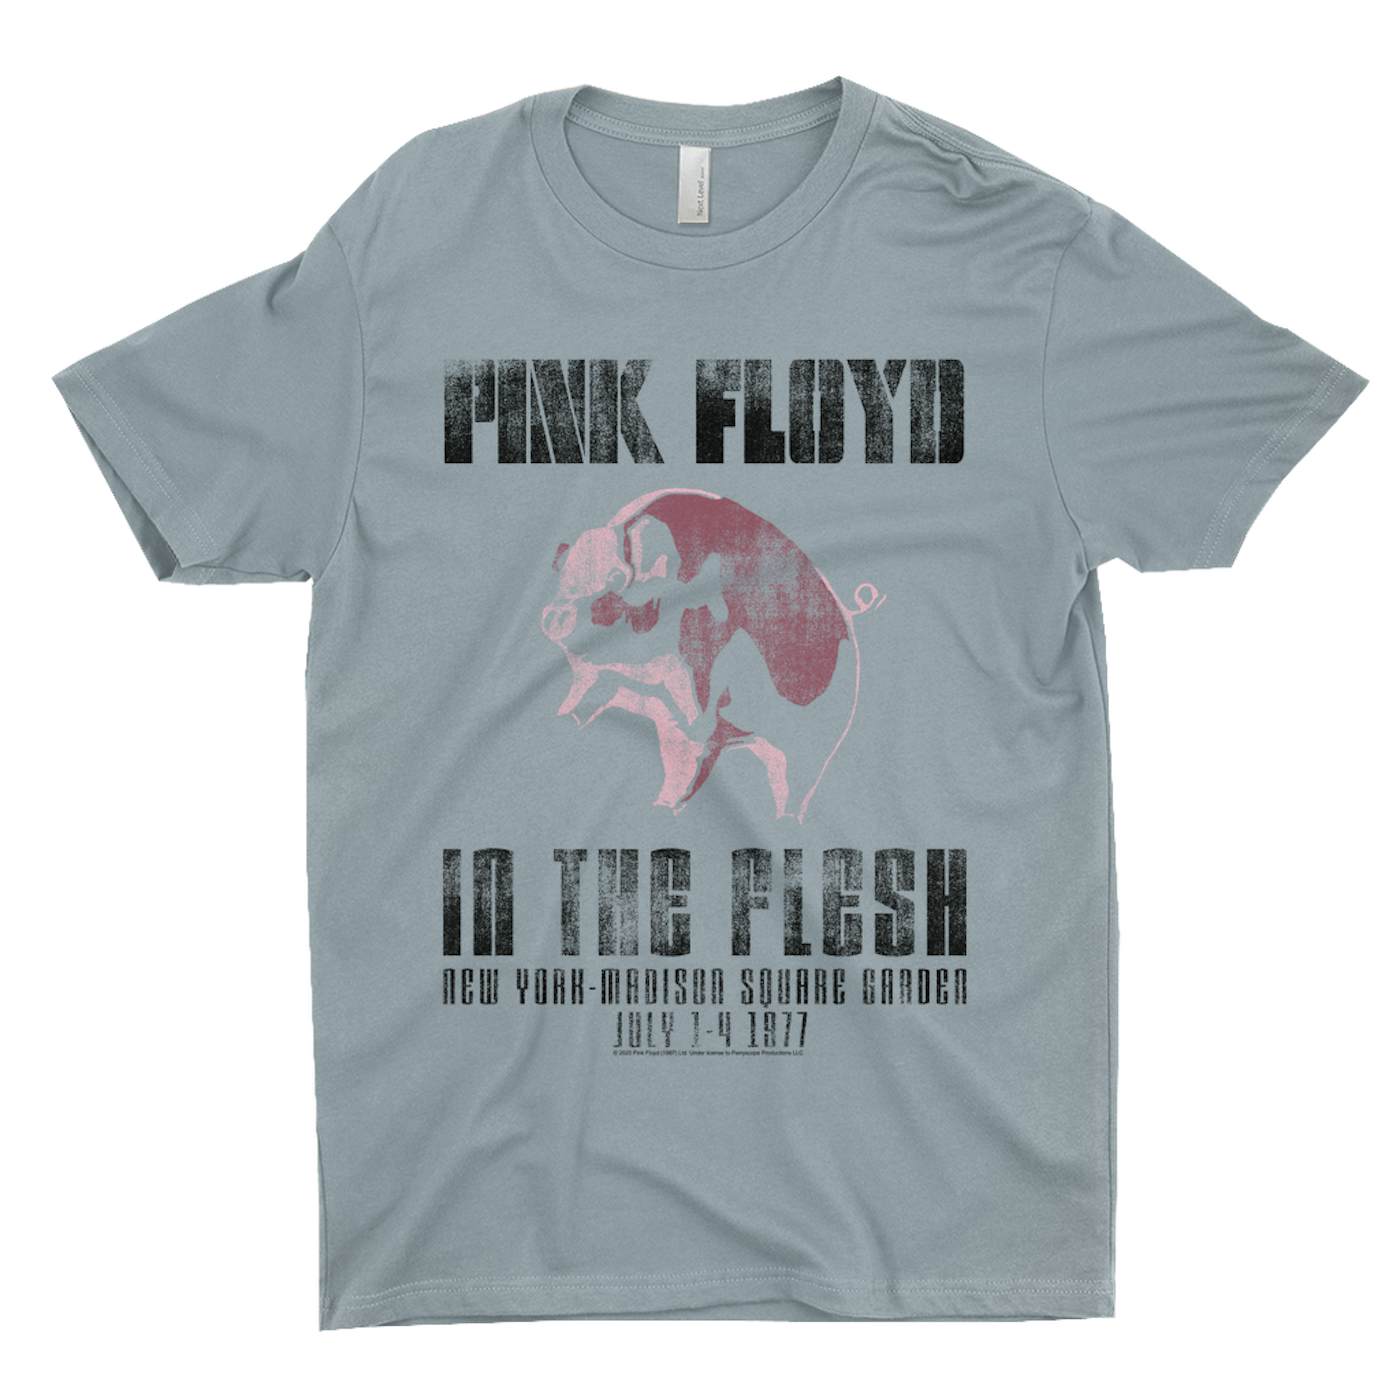 Pink Floyd T-Shirt | In The Flesh 1977 NYC Madison Square Garden Concert Pink Floyd Shirt